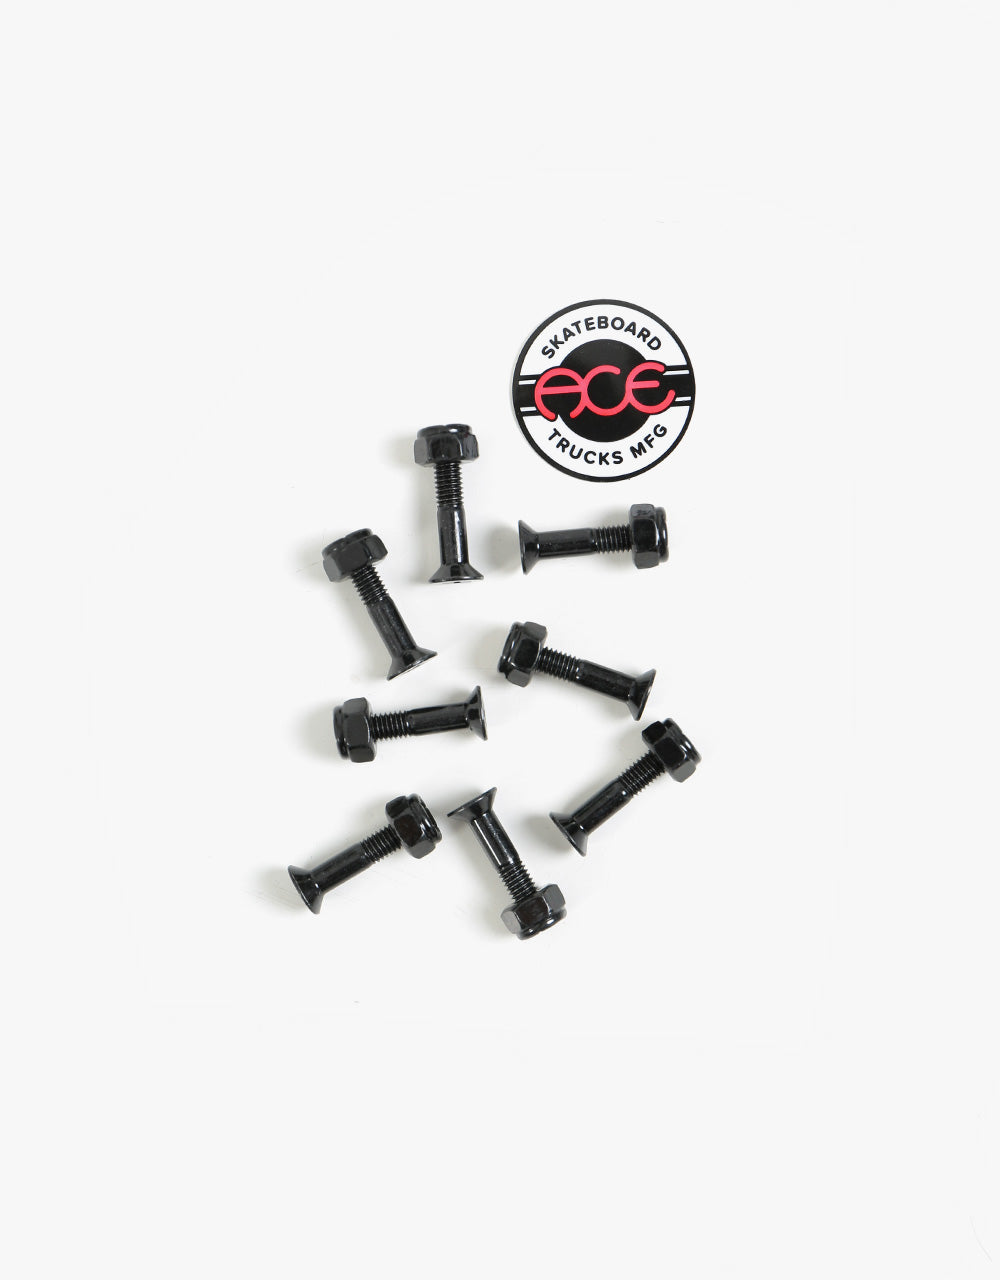 Ace 7/8" Phillips Bolts